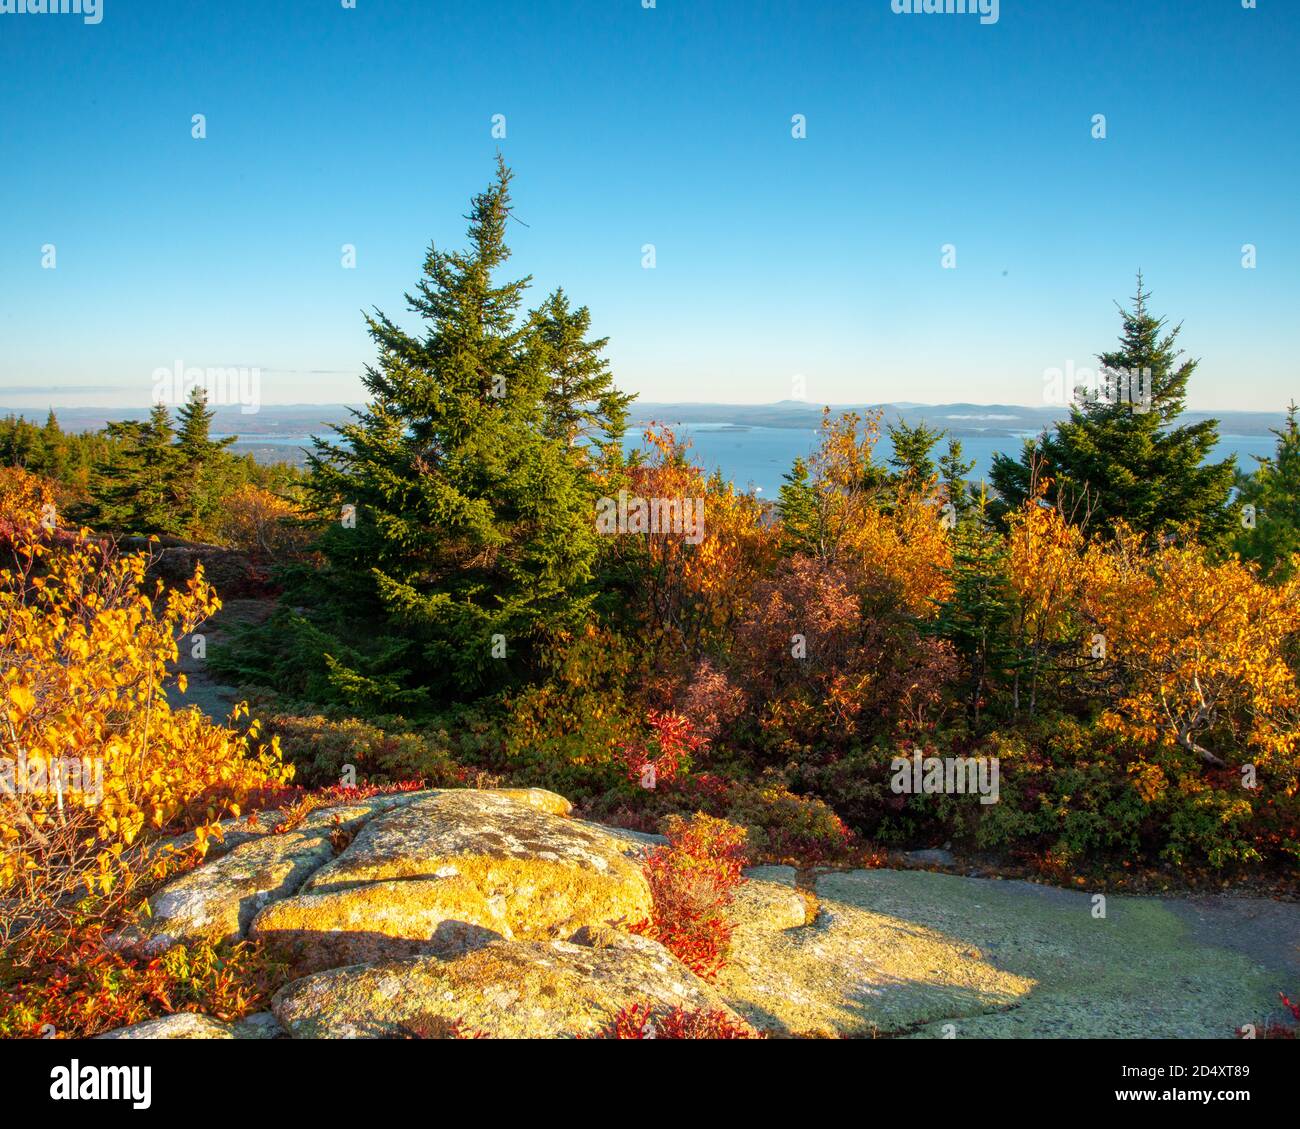 Cadillac Mountain in Acadia National Park Maine during dawn overlooking the ocean. Stock Photo